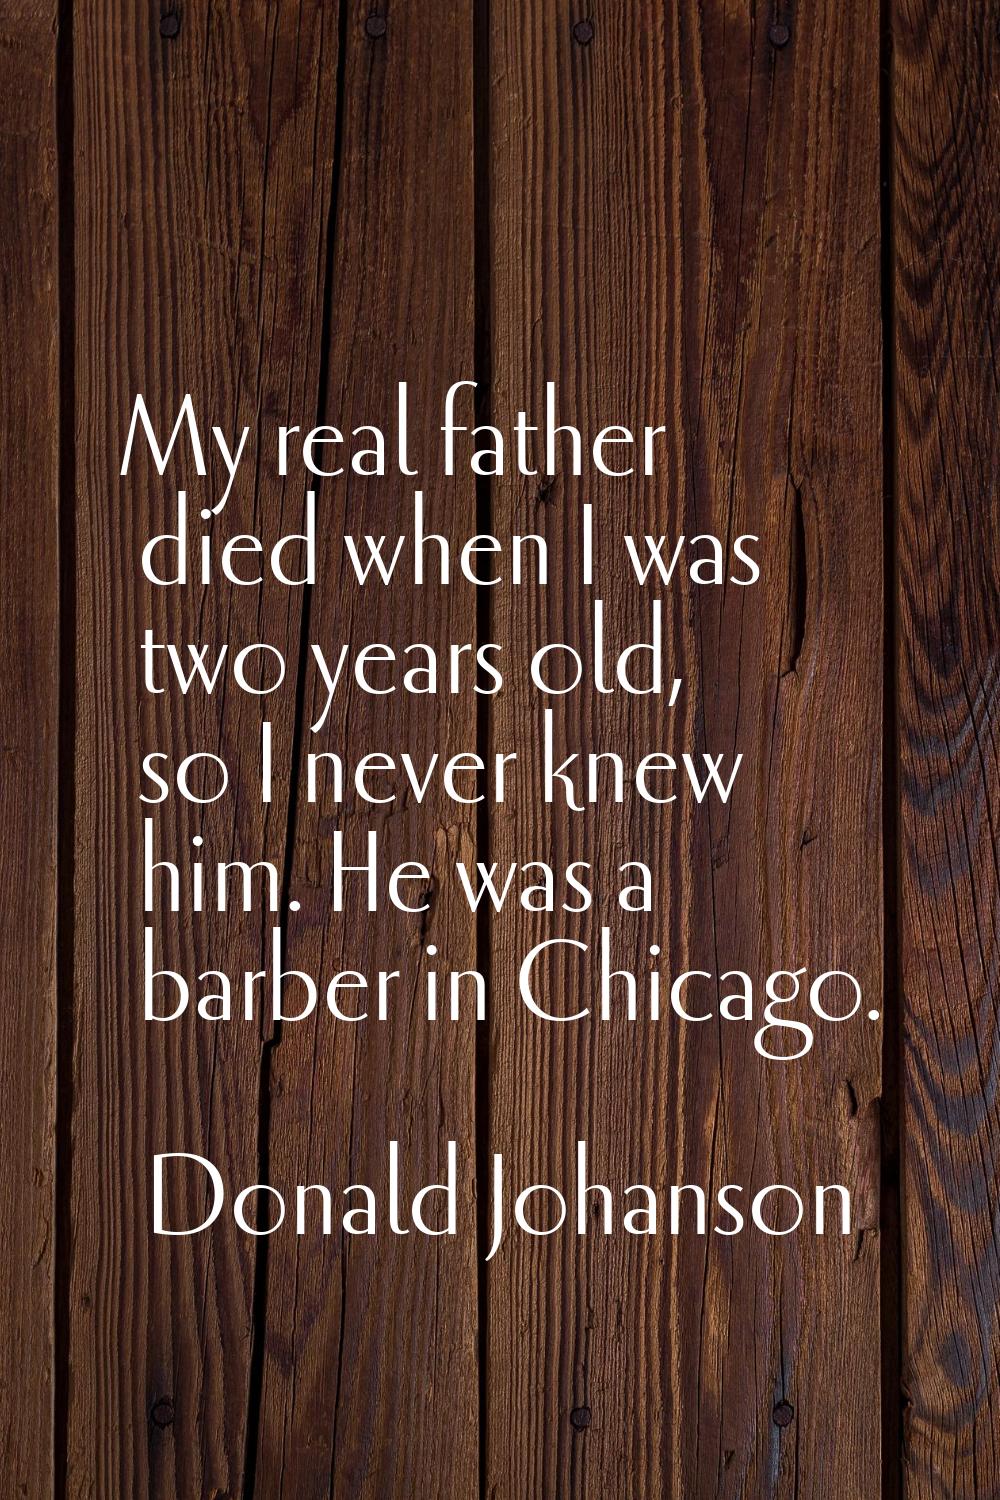 My real father died when I was two years old, so I never knew him. He was a barber in Chicago.